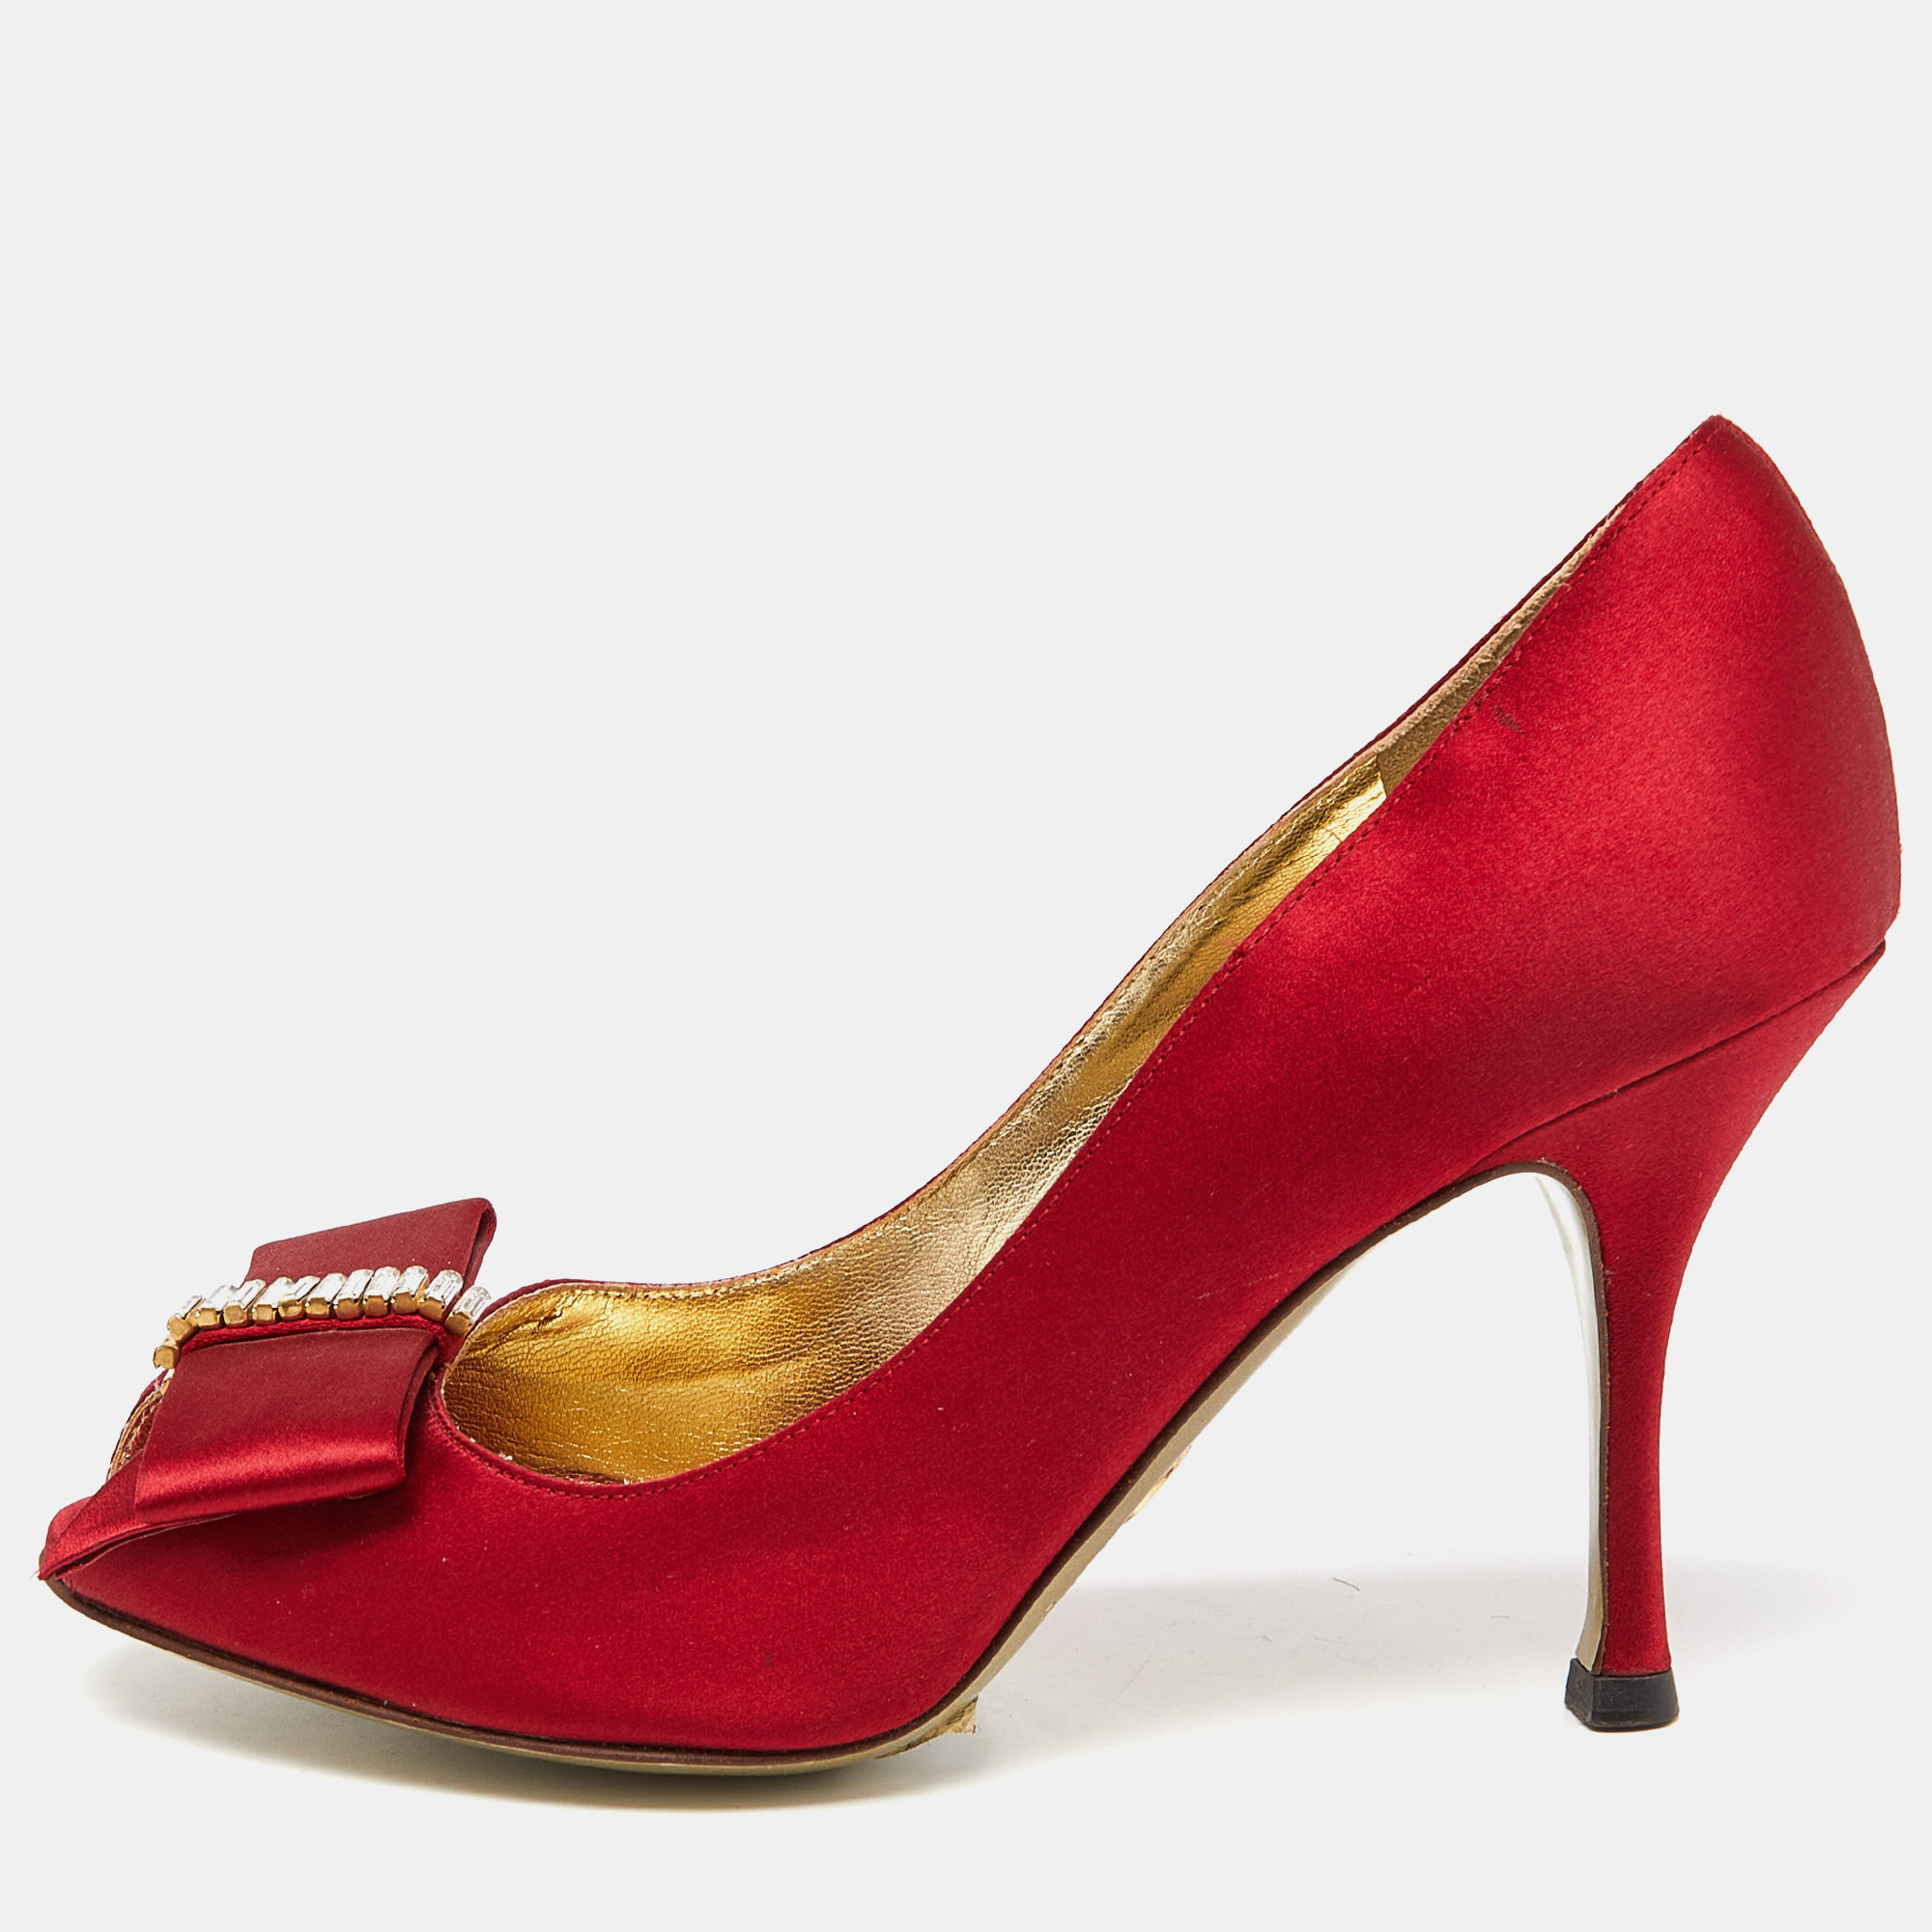 Pre-owned Dolce & Gabbana Red Satin Crystal Embellished Bow Peep Toe Pumps Size 37